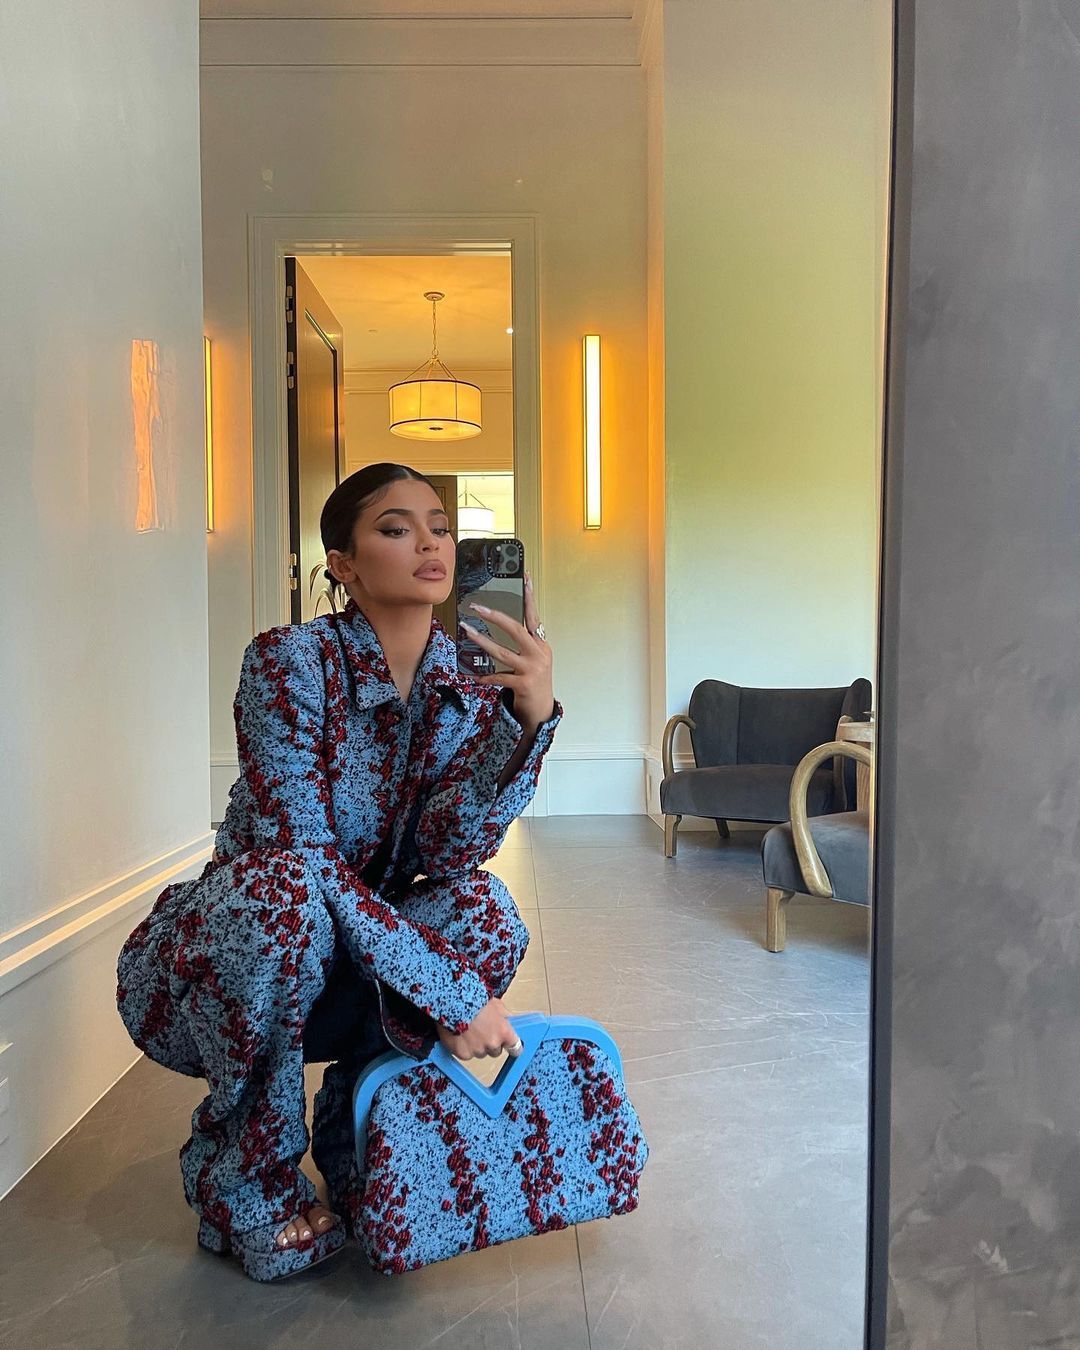 Kylie Jenner takes a selfie in patterned blue jumpsuit, matching bag, and heels. 